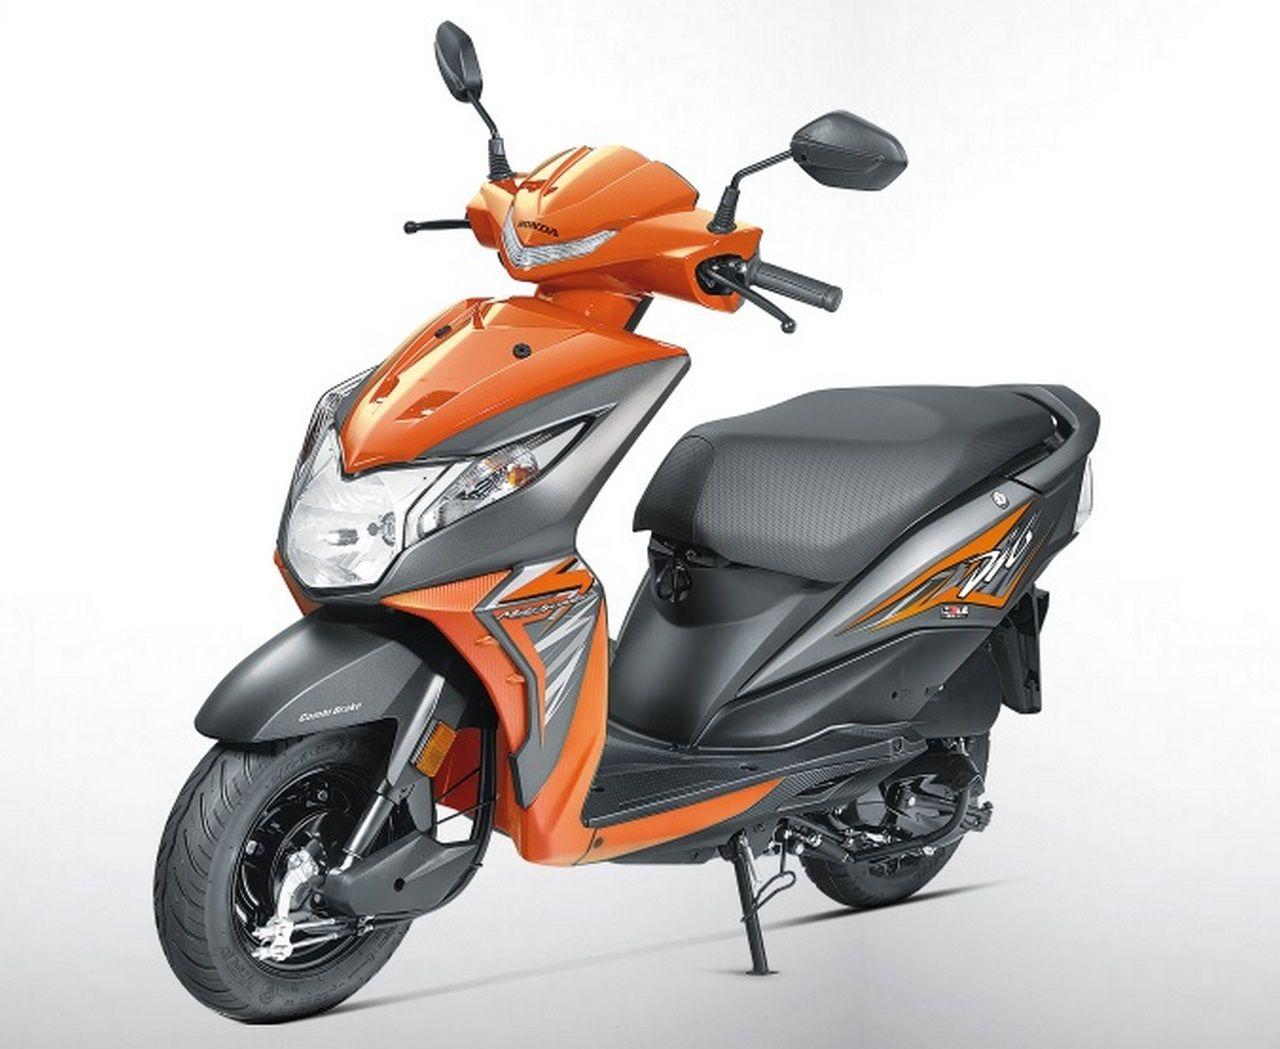 Honda Dio Price, Image, Colours And Specs You Need To Know